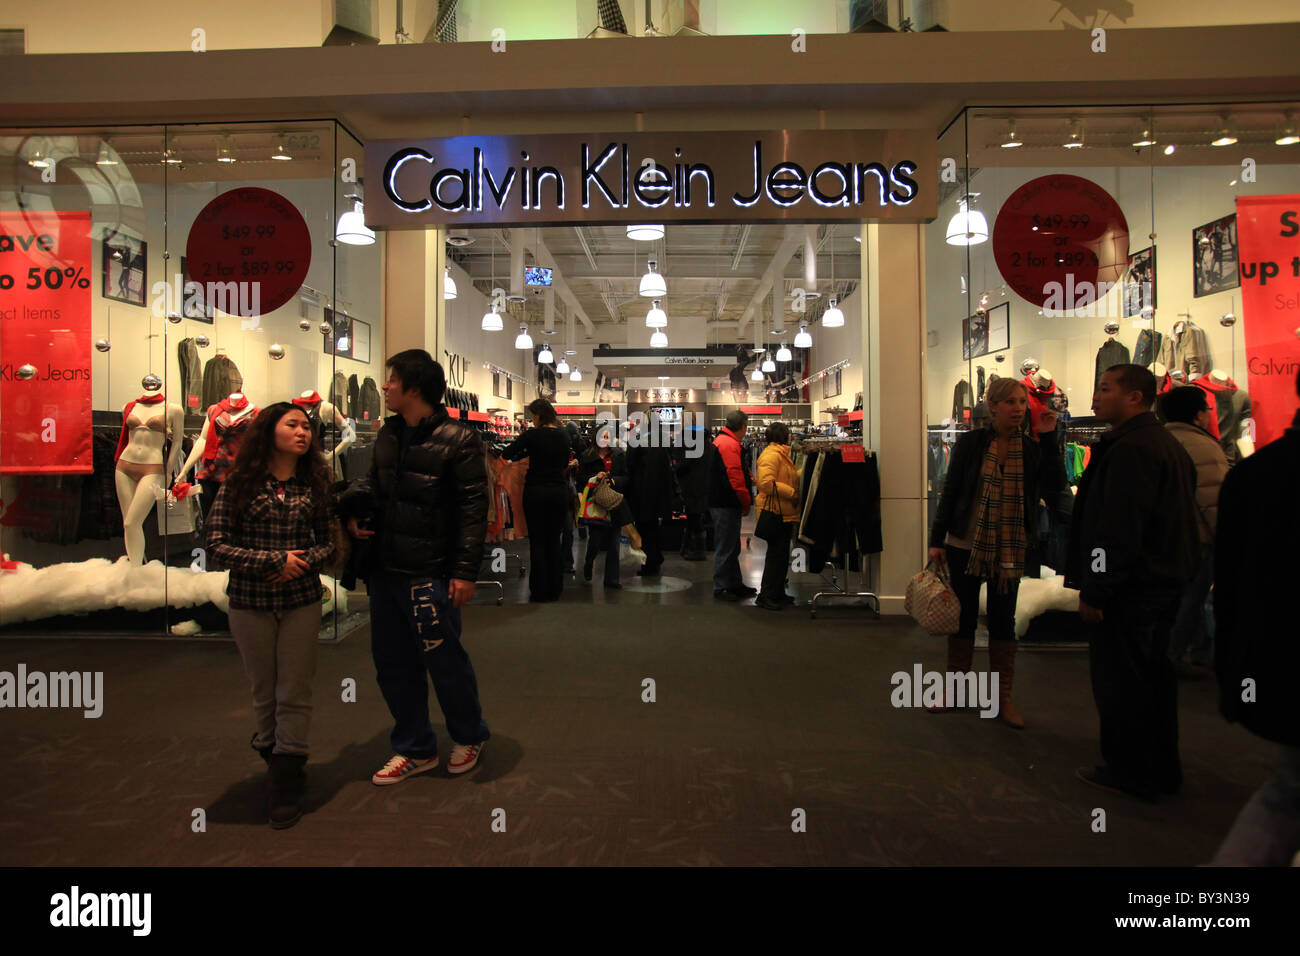 Calvin Klein Jeans outlet store in Vaughan Mills Mall in Toronto, Canada  2010 Stock Photo - Alamy